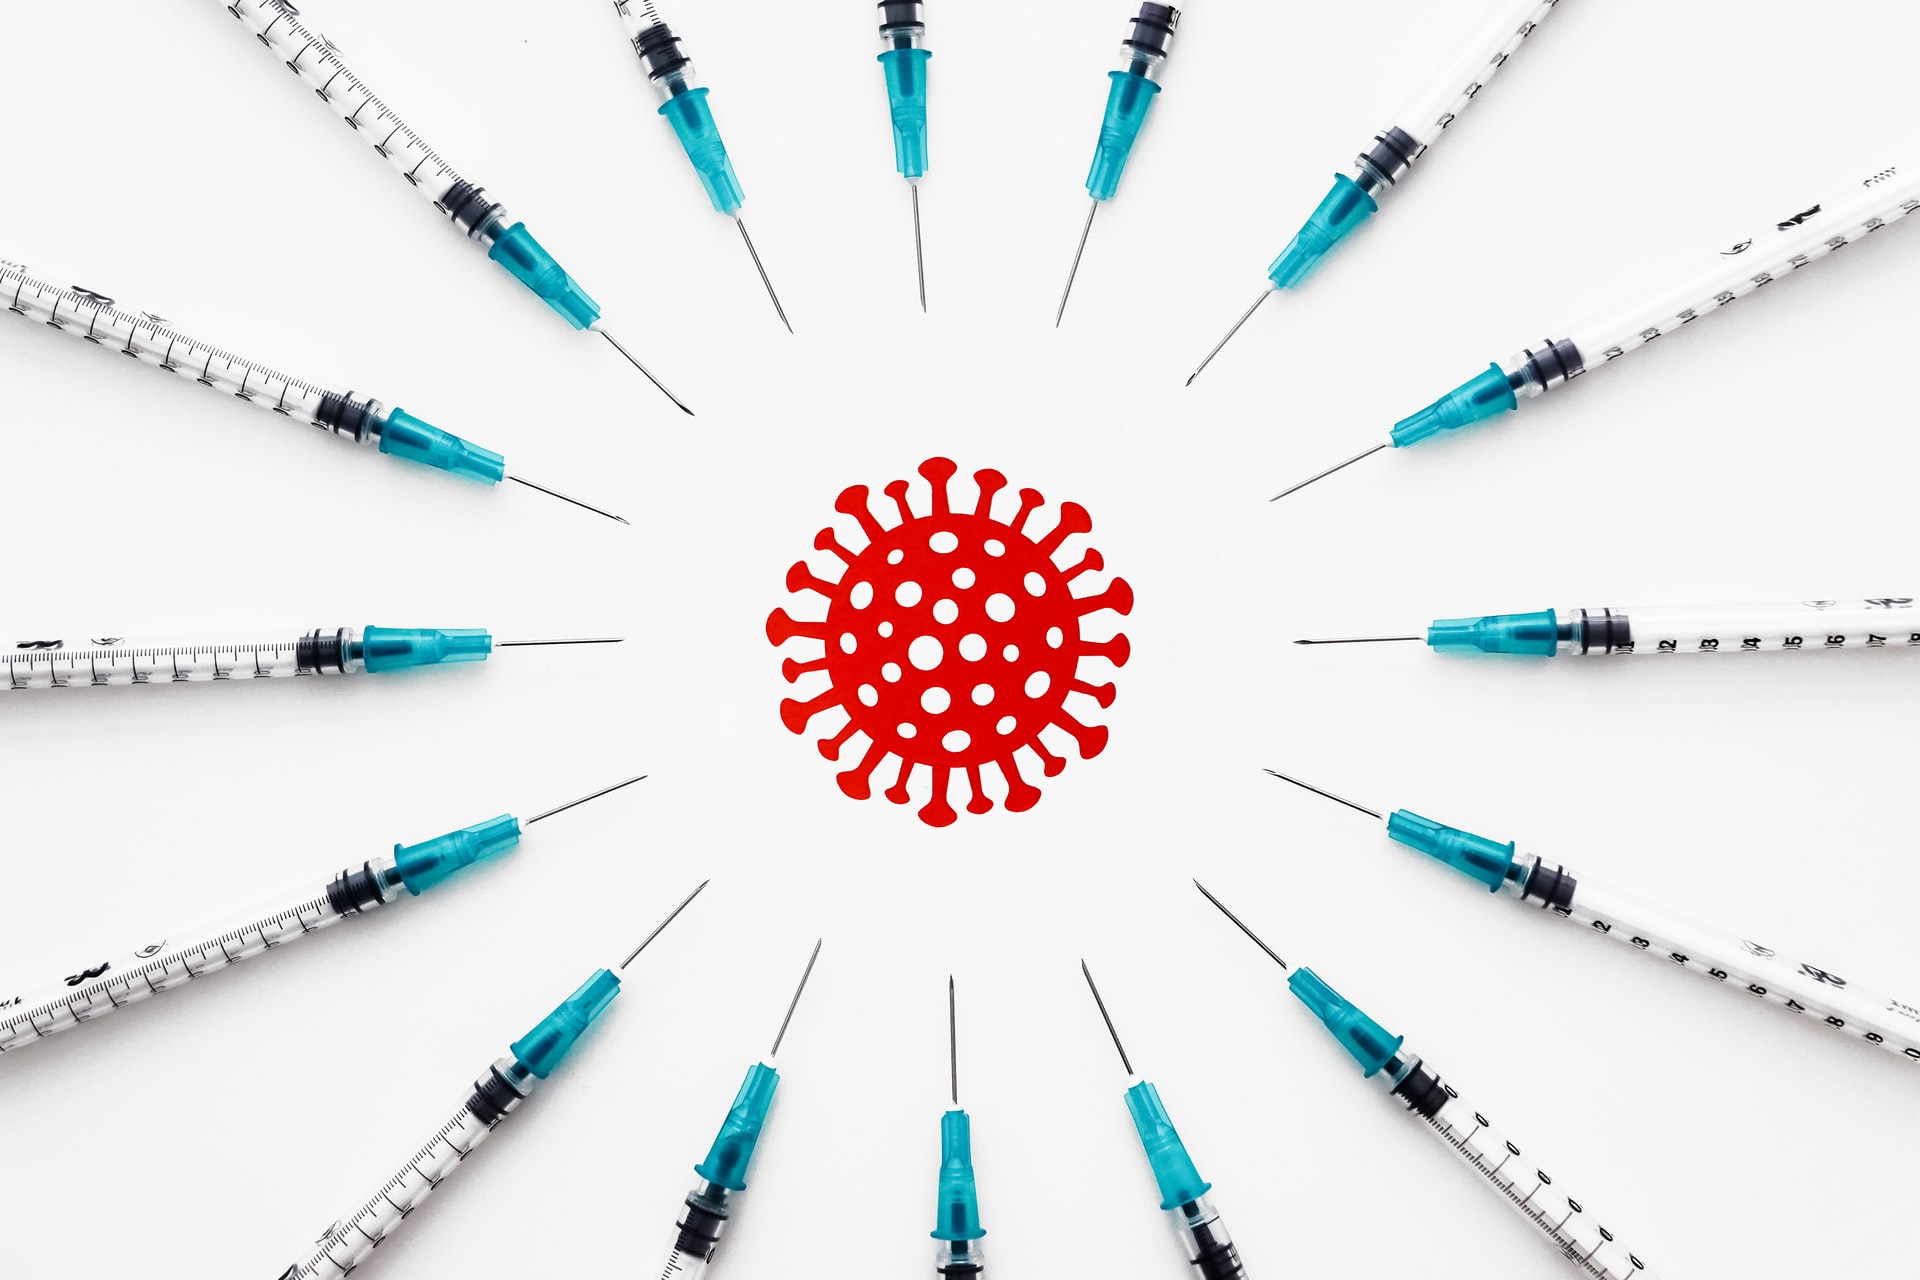 Injection syringe in a circle around a virus